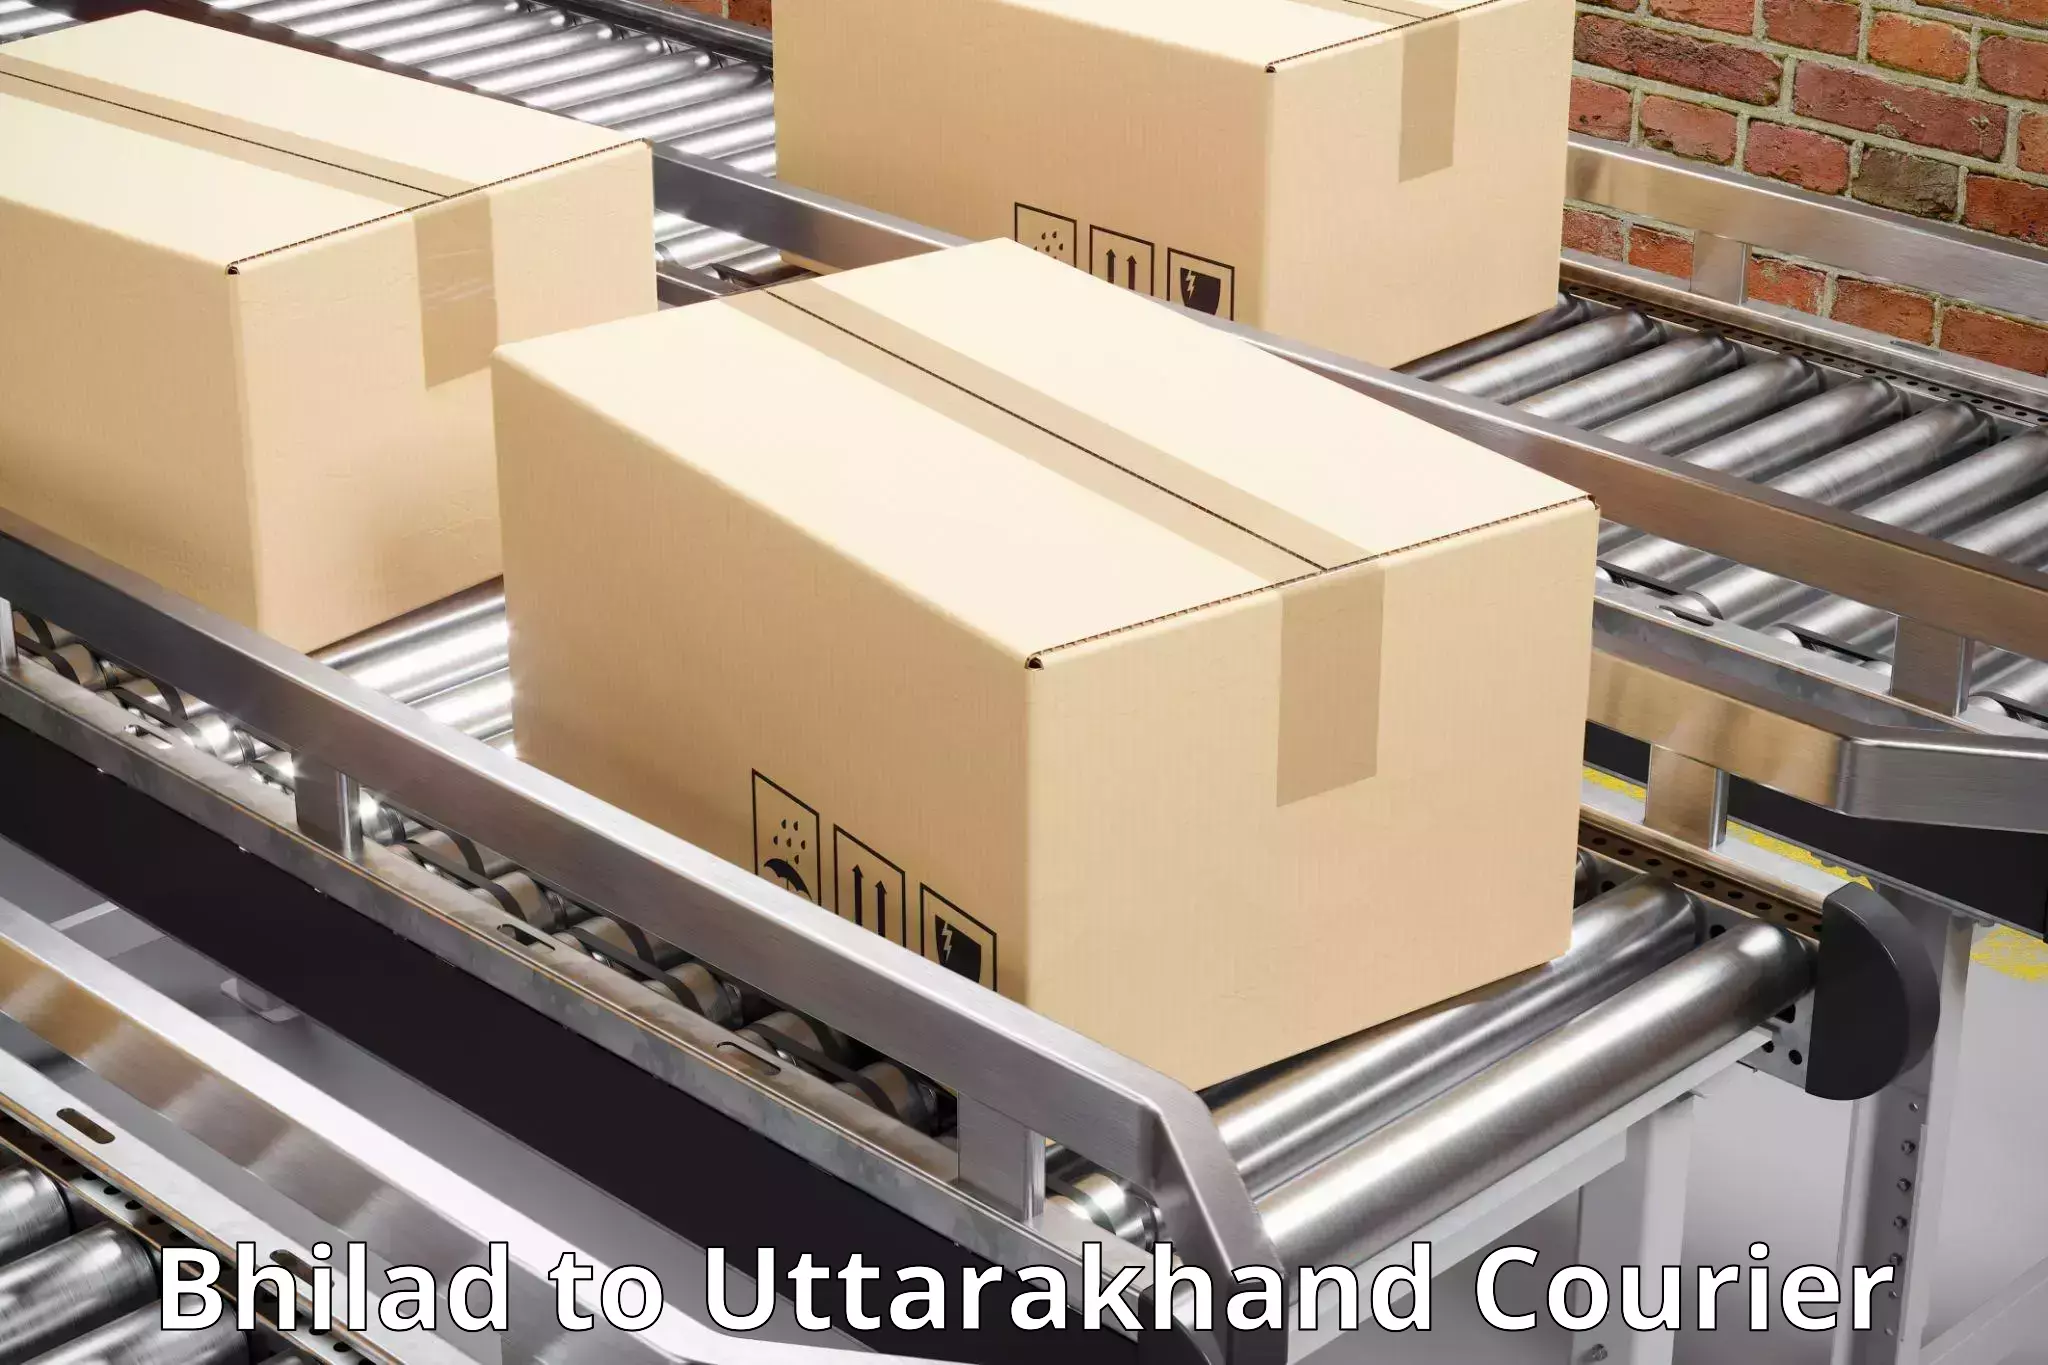 Customizable shipping options in Bhilad to Almora